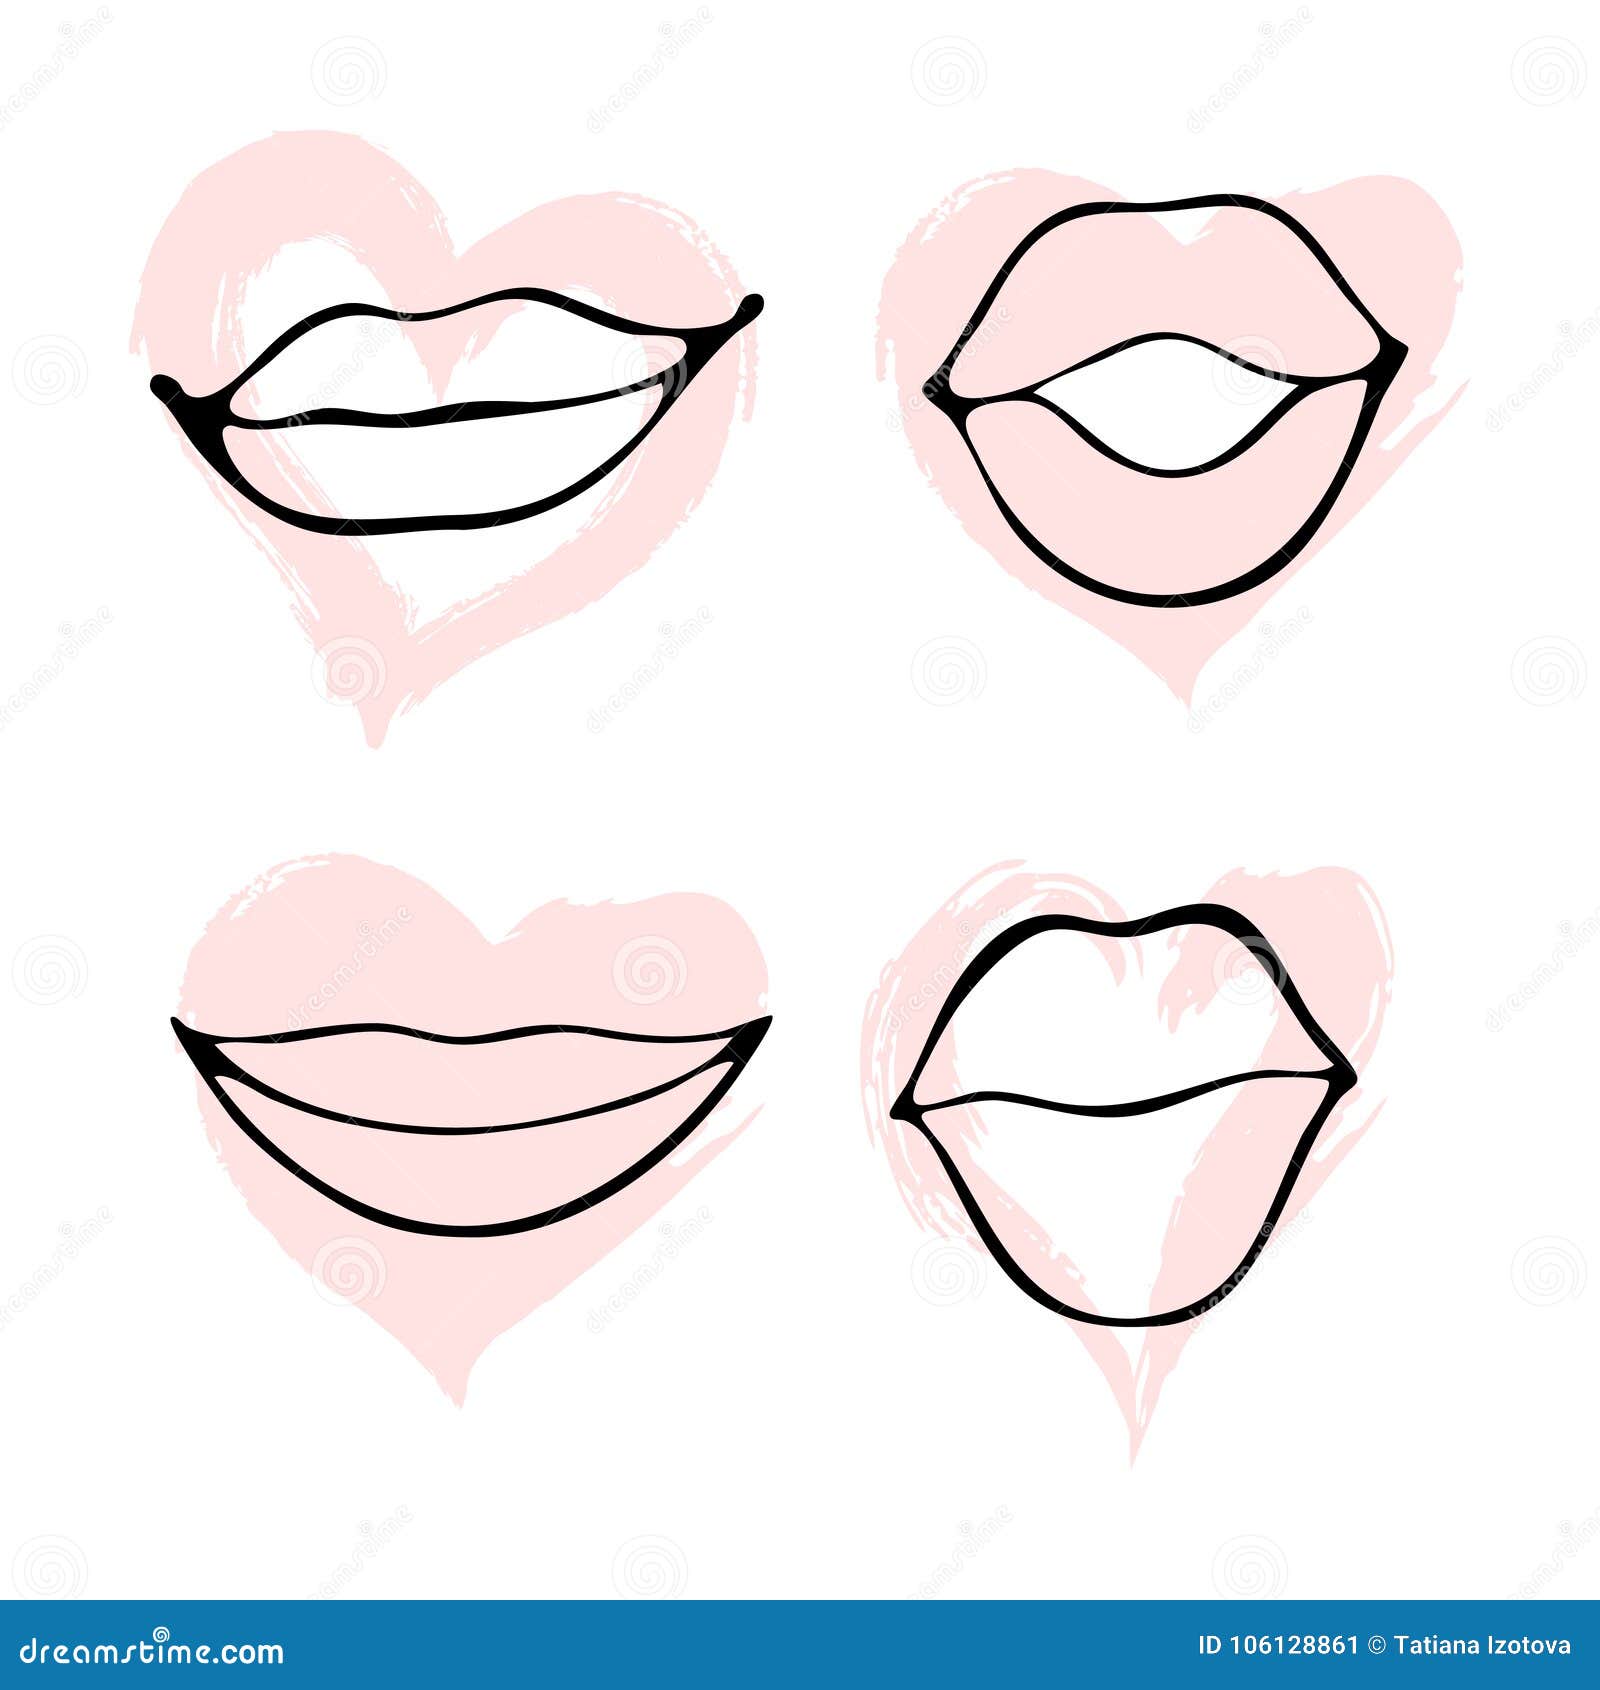 Handdrawn sketch of female lips on a white background isolated  wall  stickers white background white vintage  myloviewcom